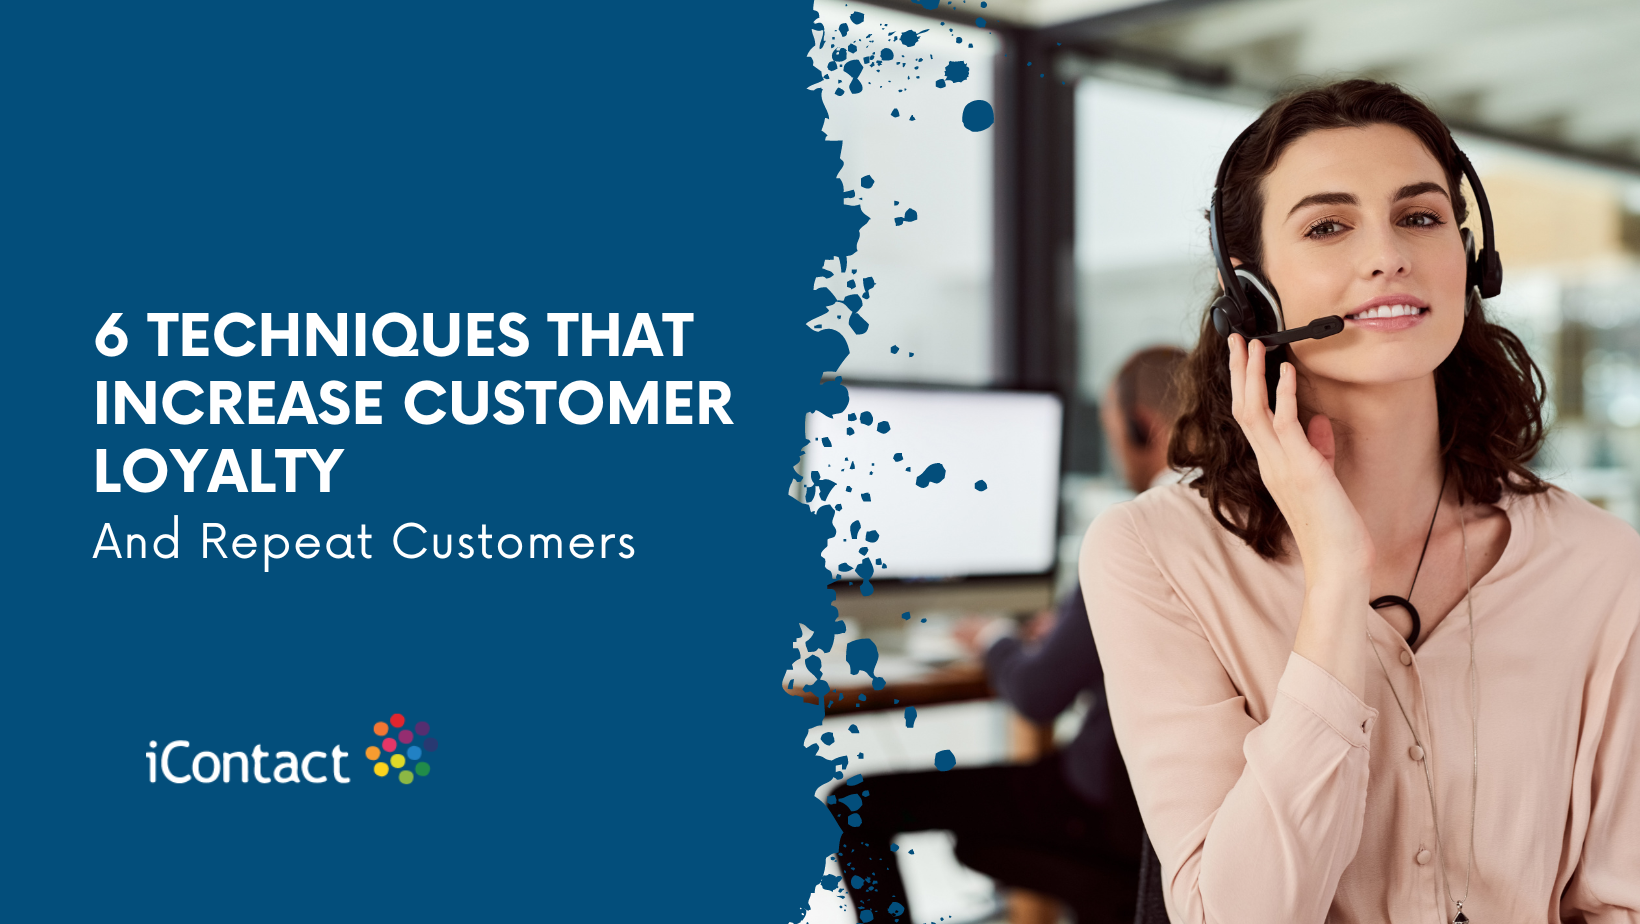 6 techniques to increase customer loyalty in your business with iContact BPO